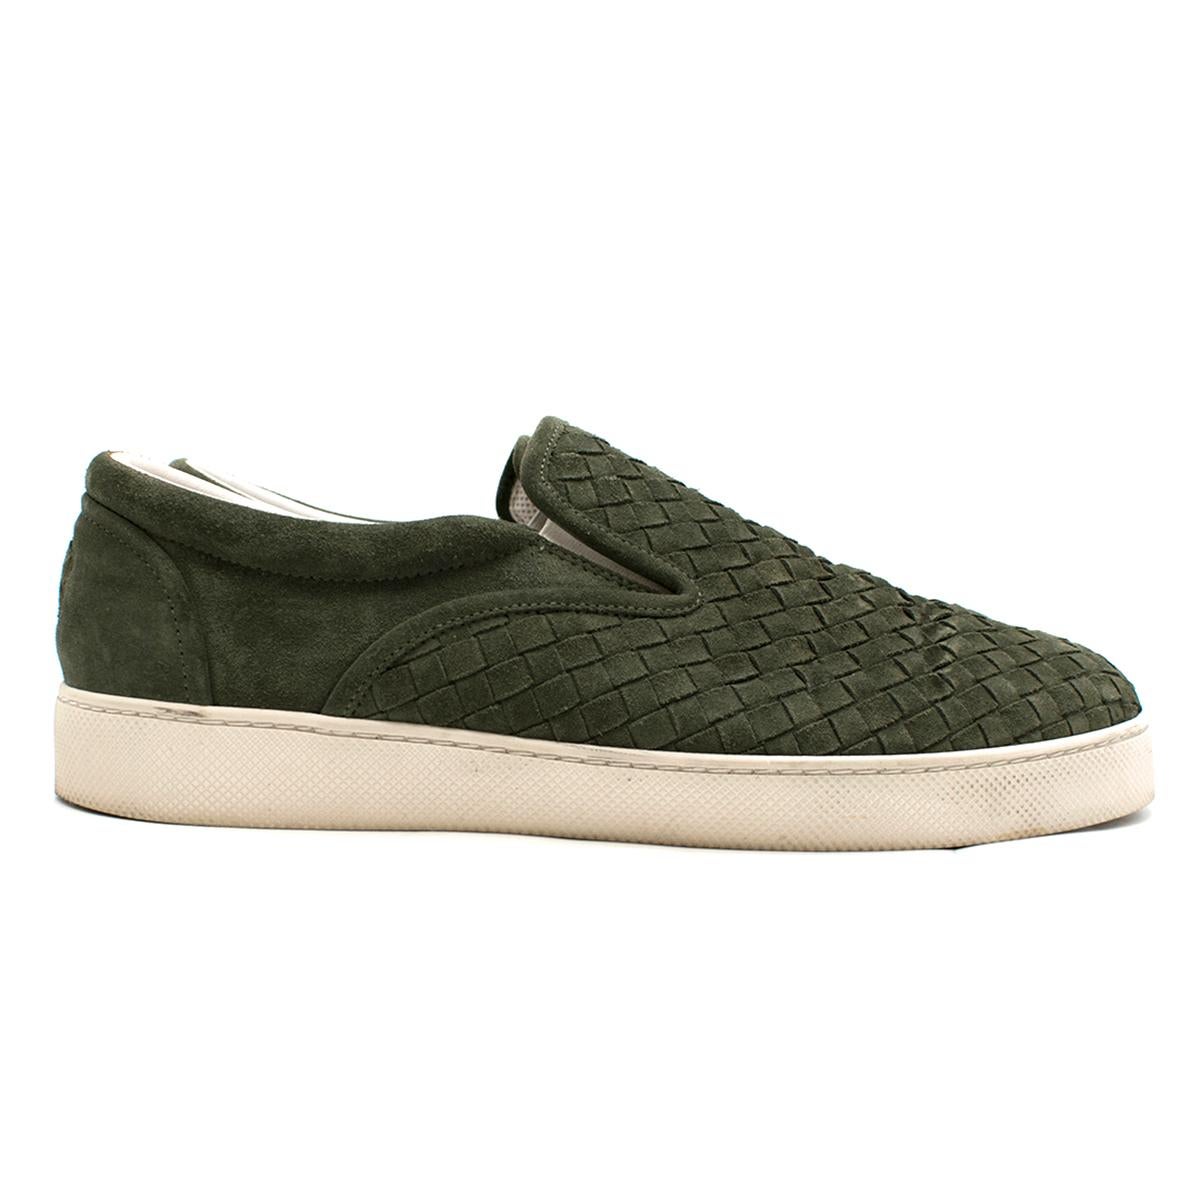 Bottega Veneta Green Intrecciato Suede Dodger Sneaker

- Green Suede Dodger Sneaker 
- Iconic Intrecciato motif at front of sneaker 
- Slip on 
- White rubber sole 

Please note, these items are pre-owned and may show some signs of storage, even